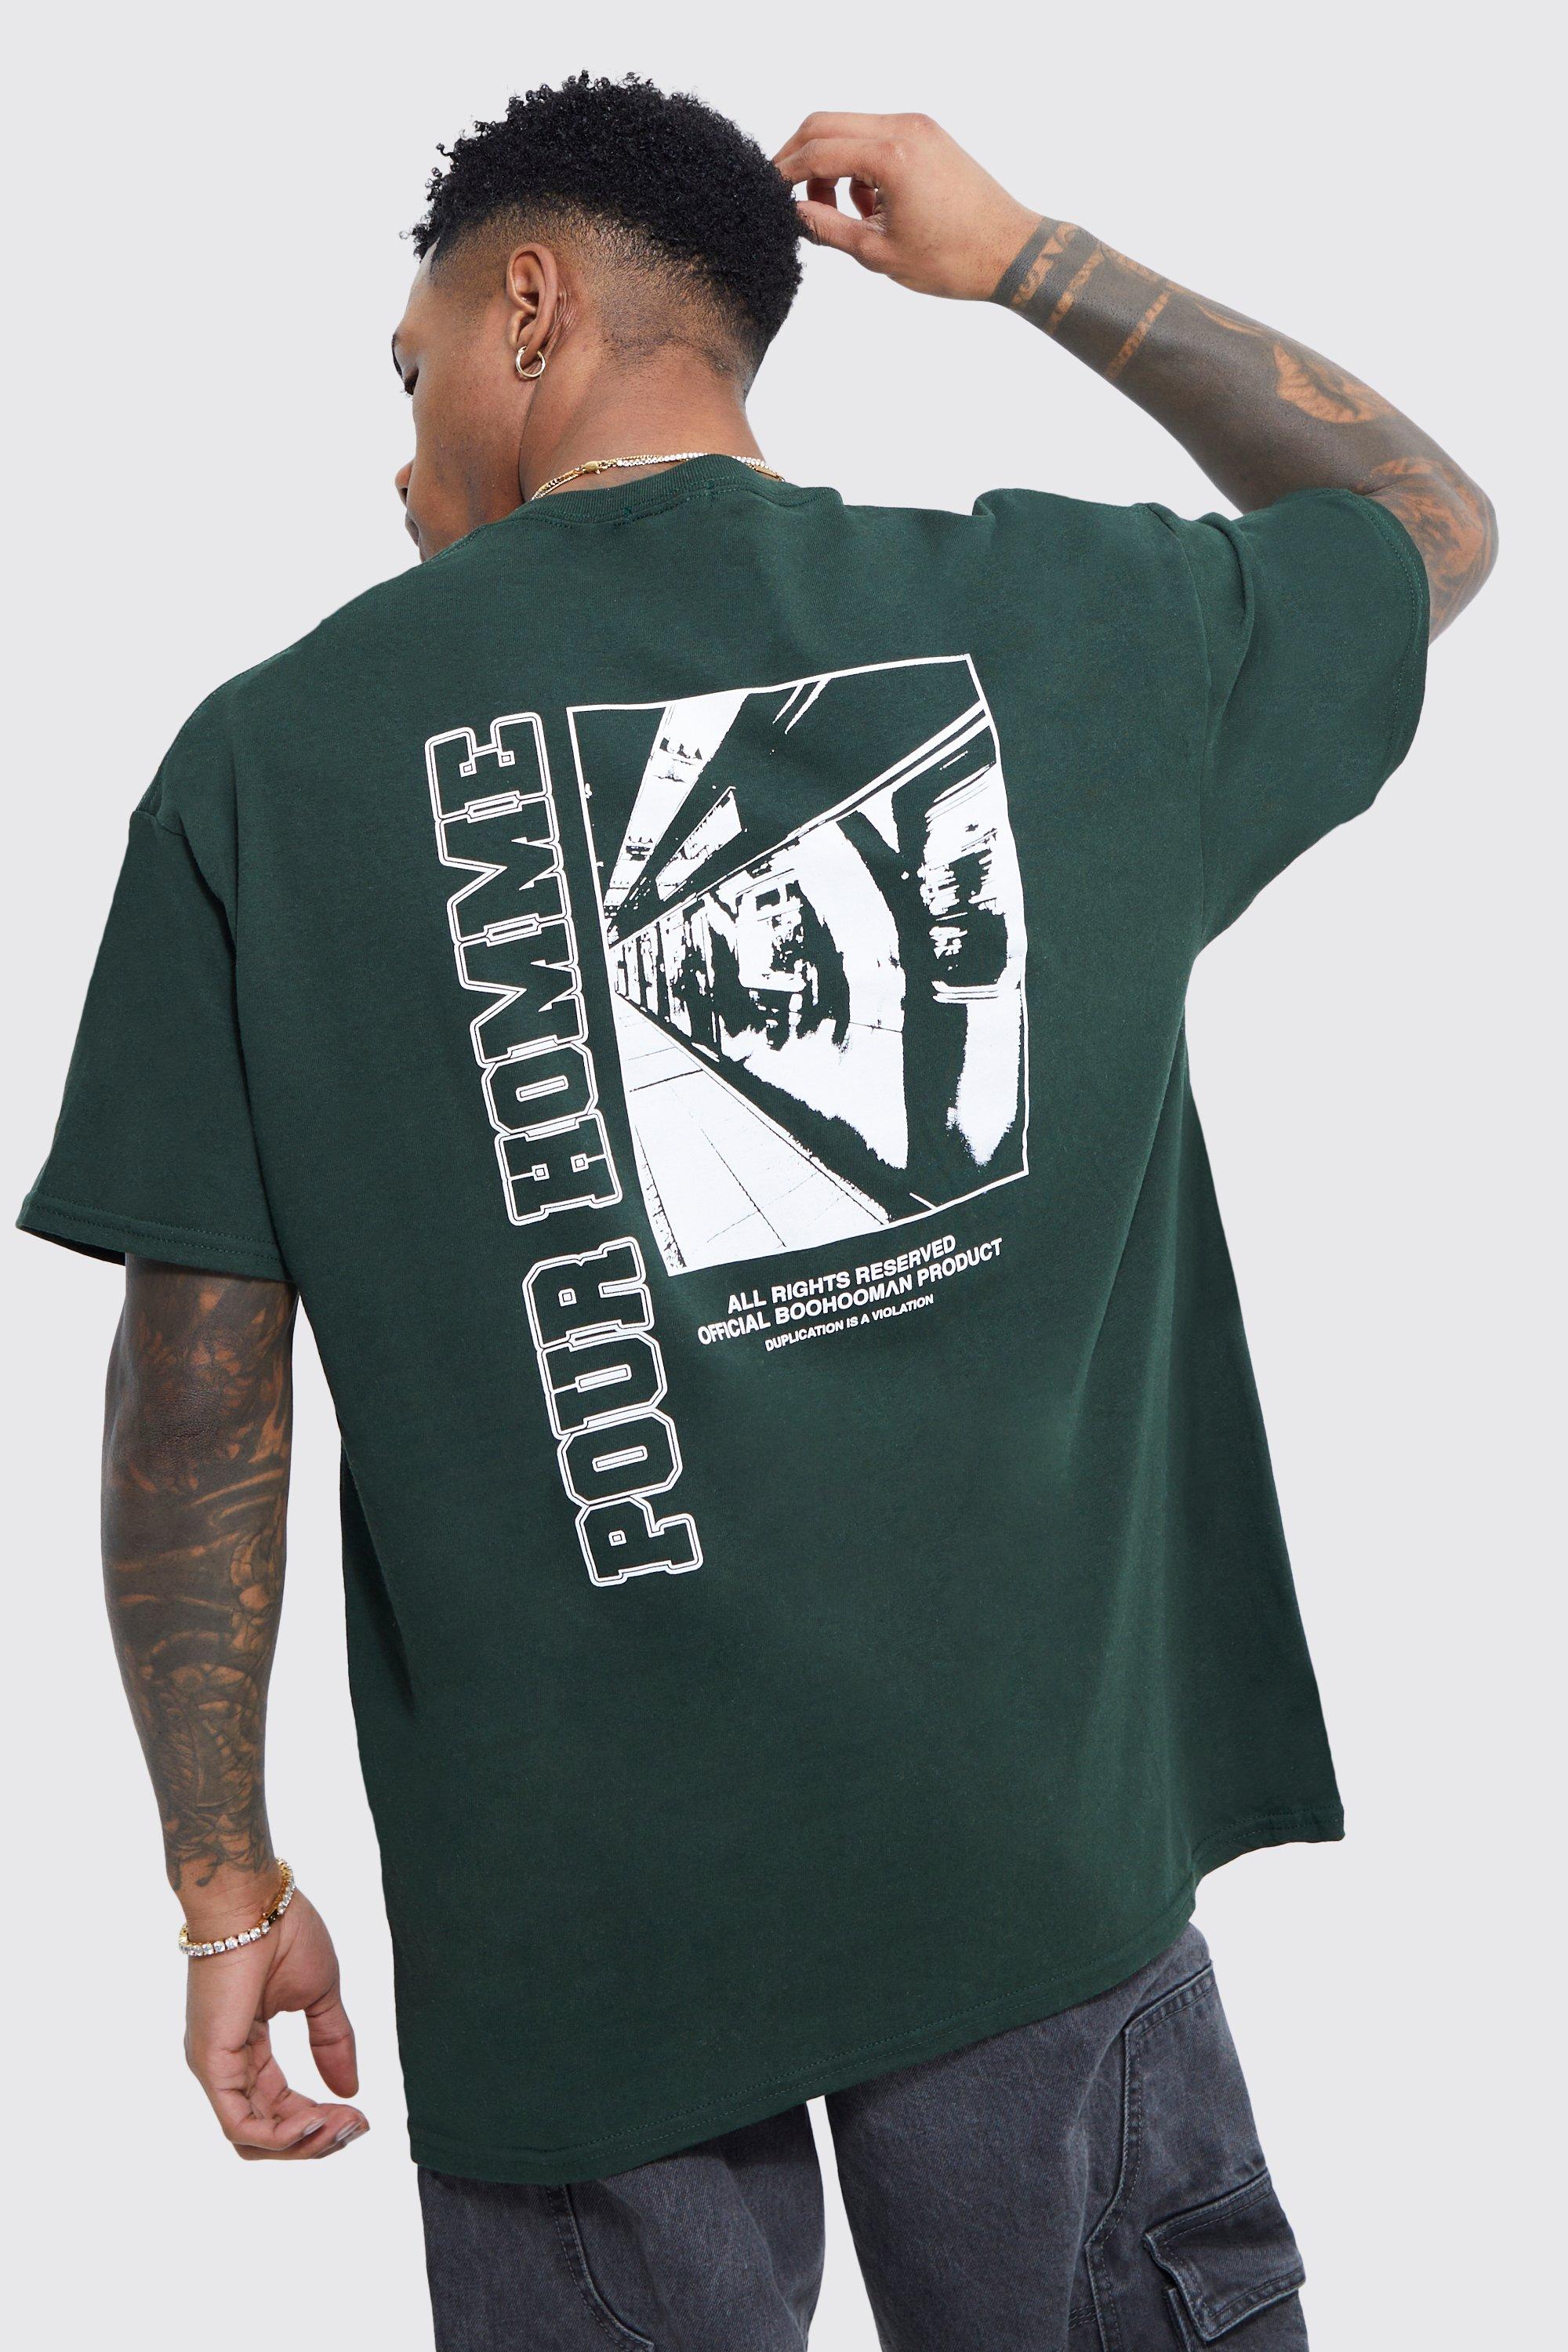 boohooMAN Oversized Pour Homme Graphic T-Shirt - Green - Size Xs